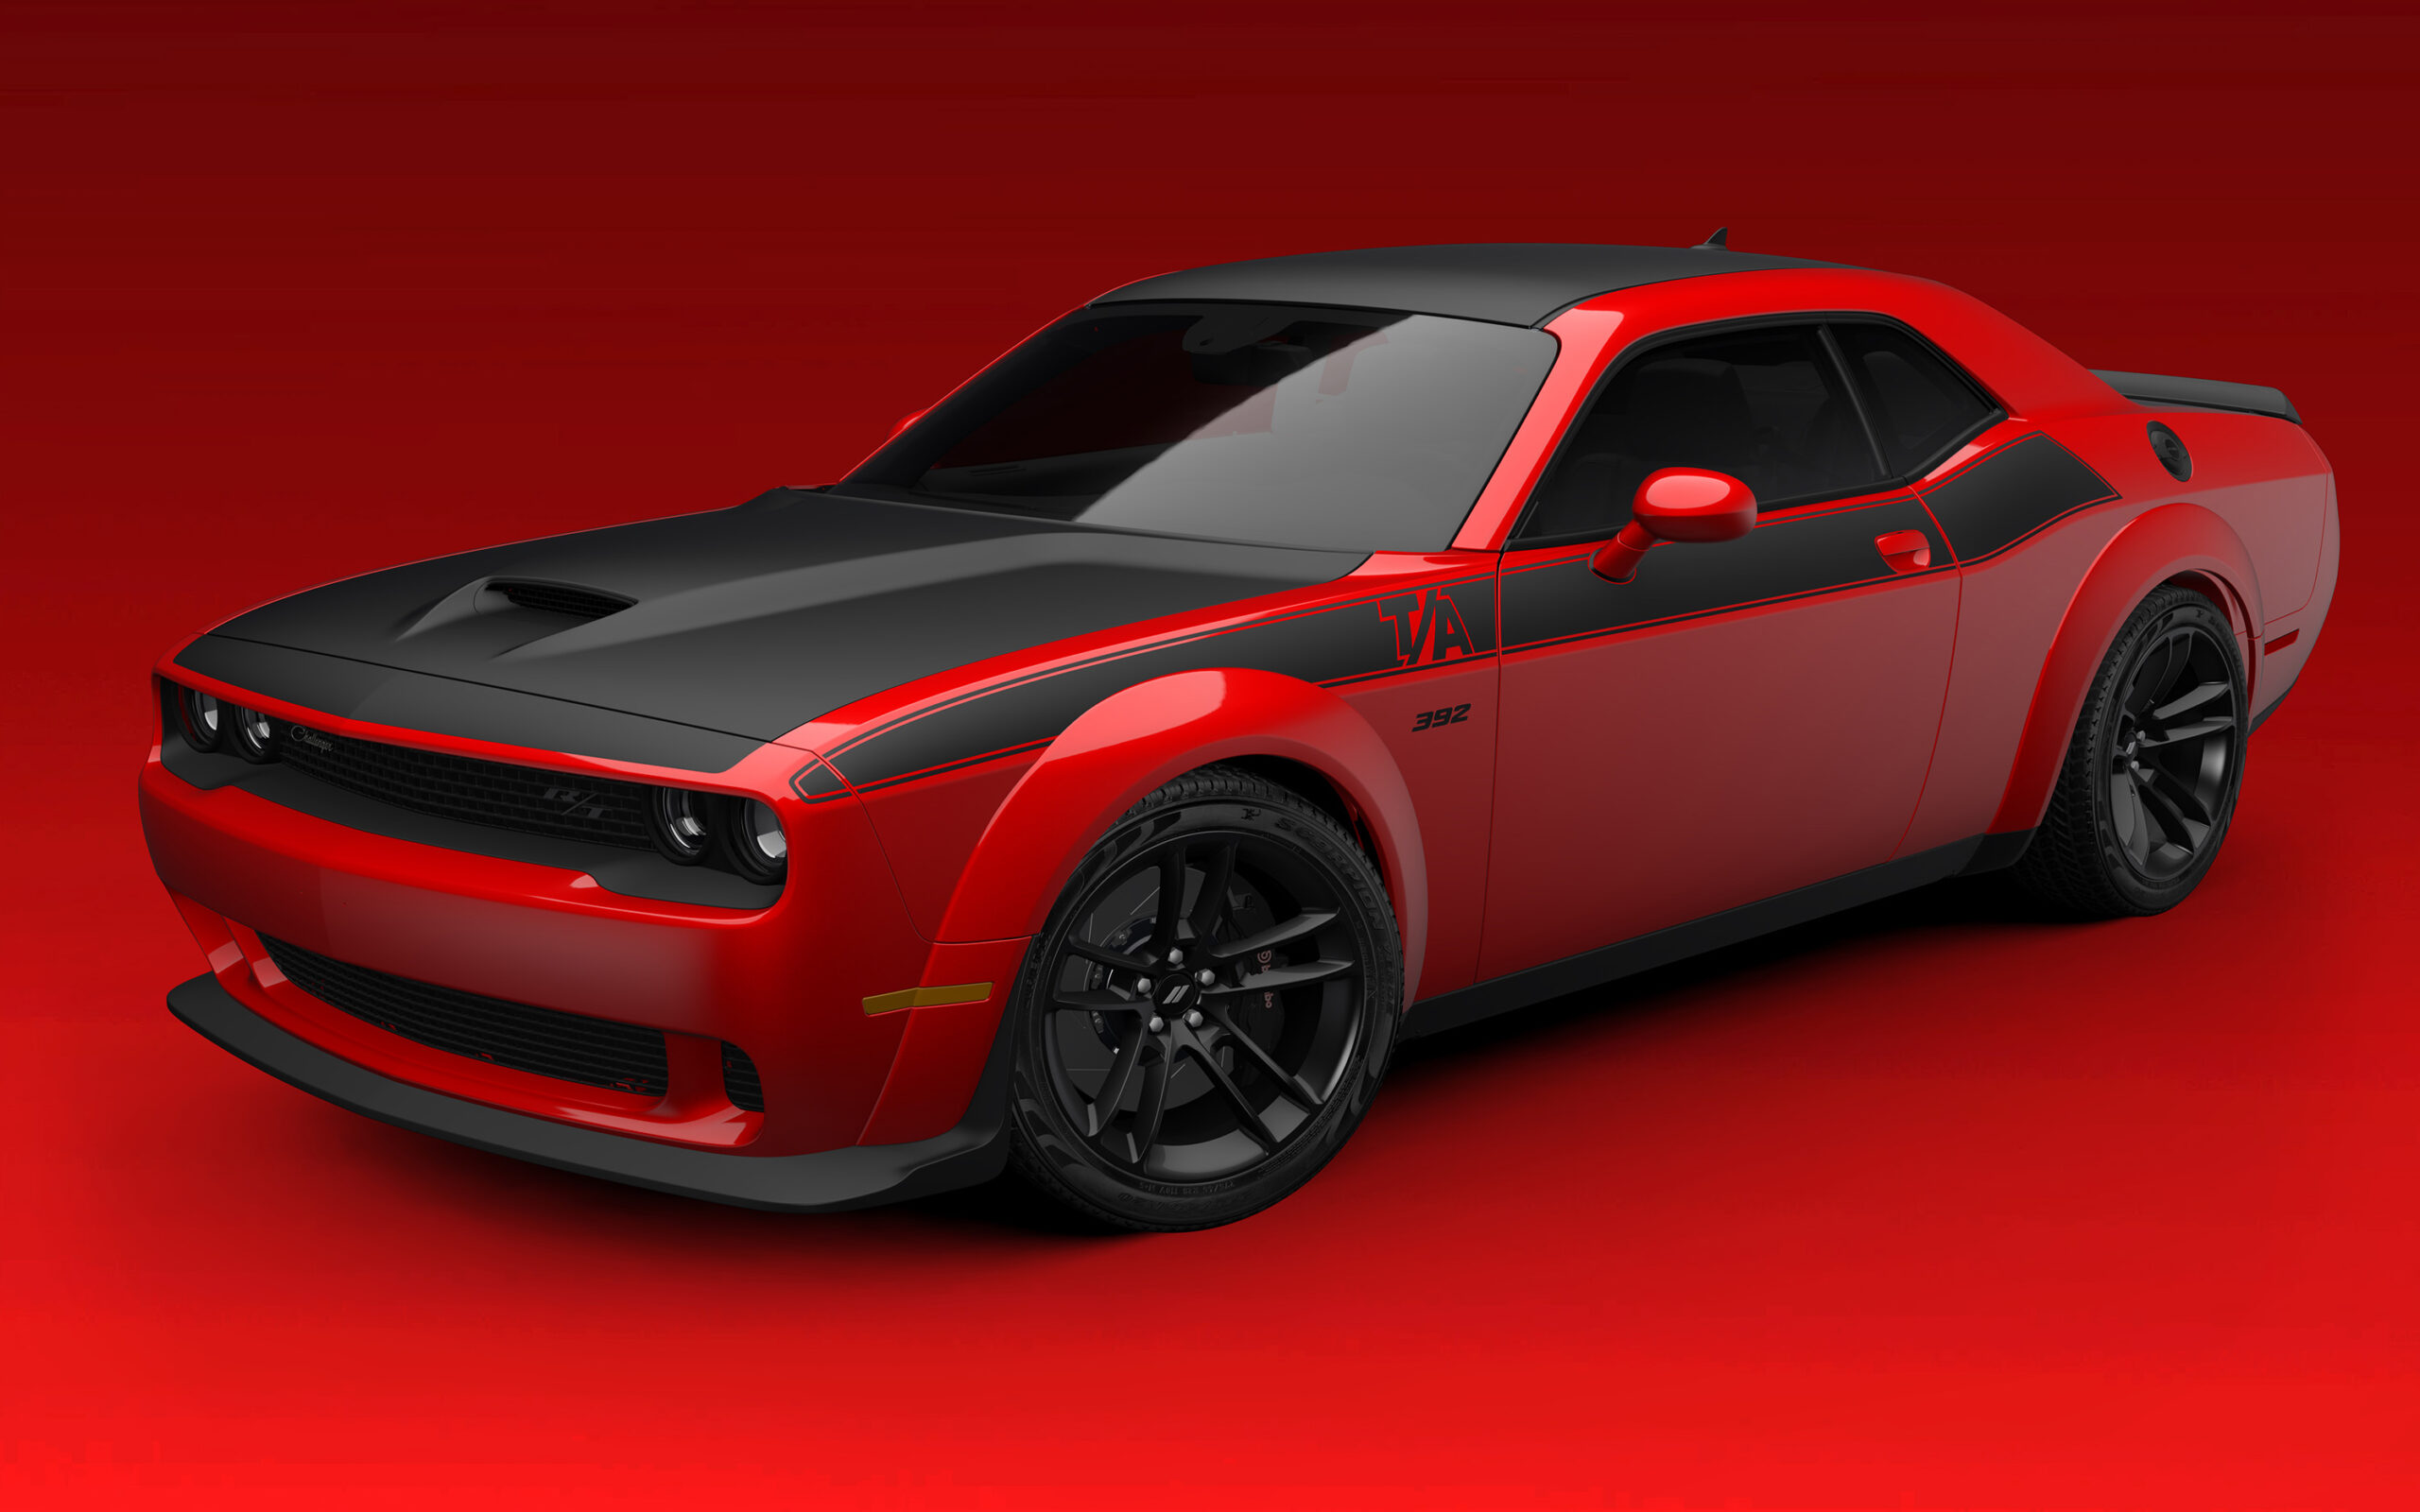 2021 Dodge Challenger T/A 392 Widebody builds on the T/A legacy